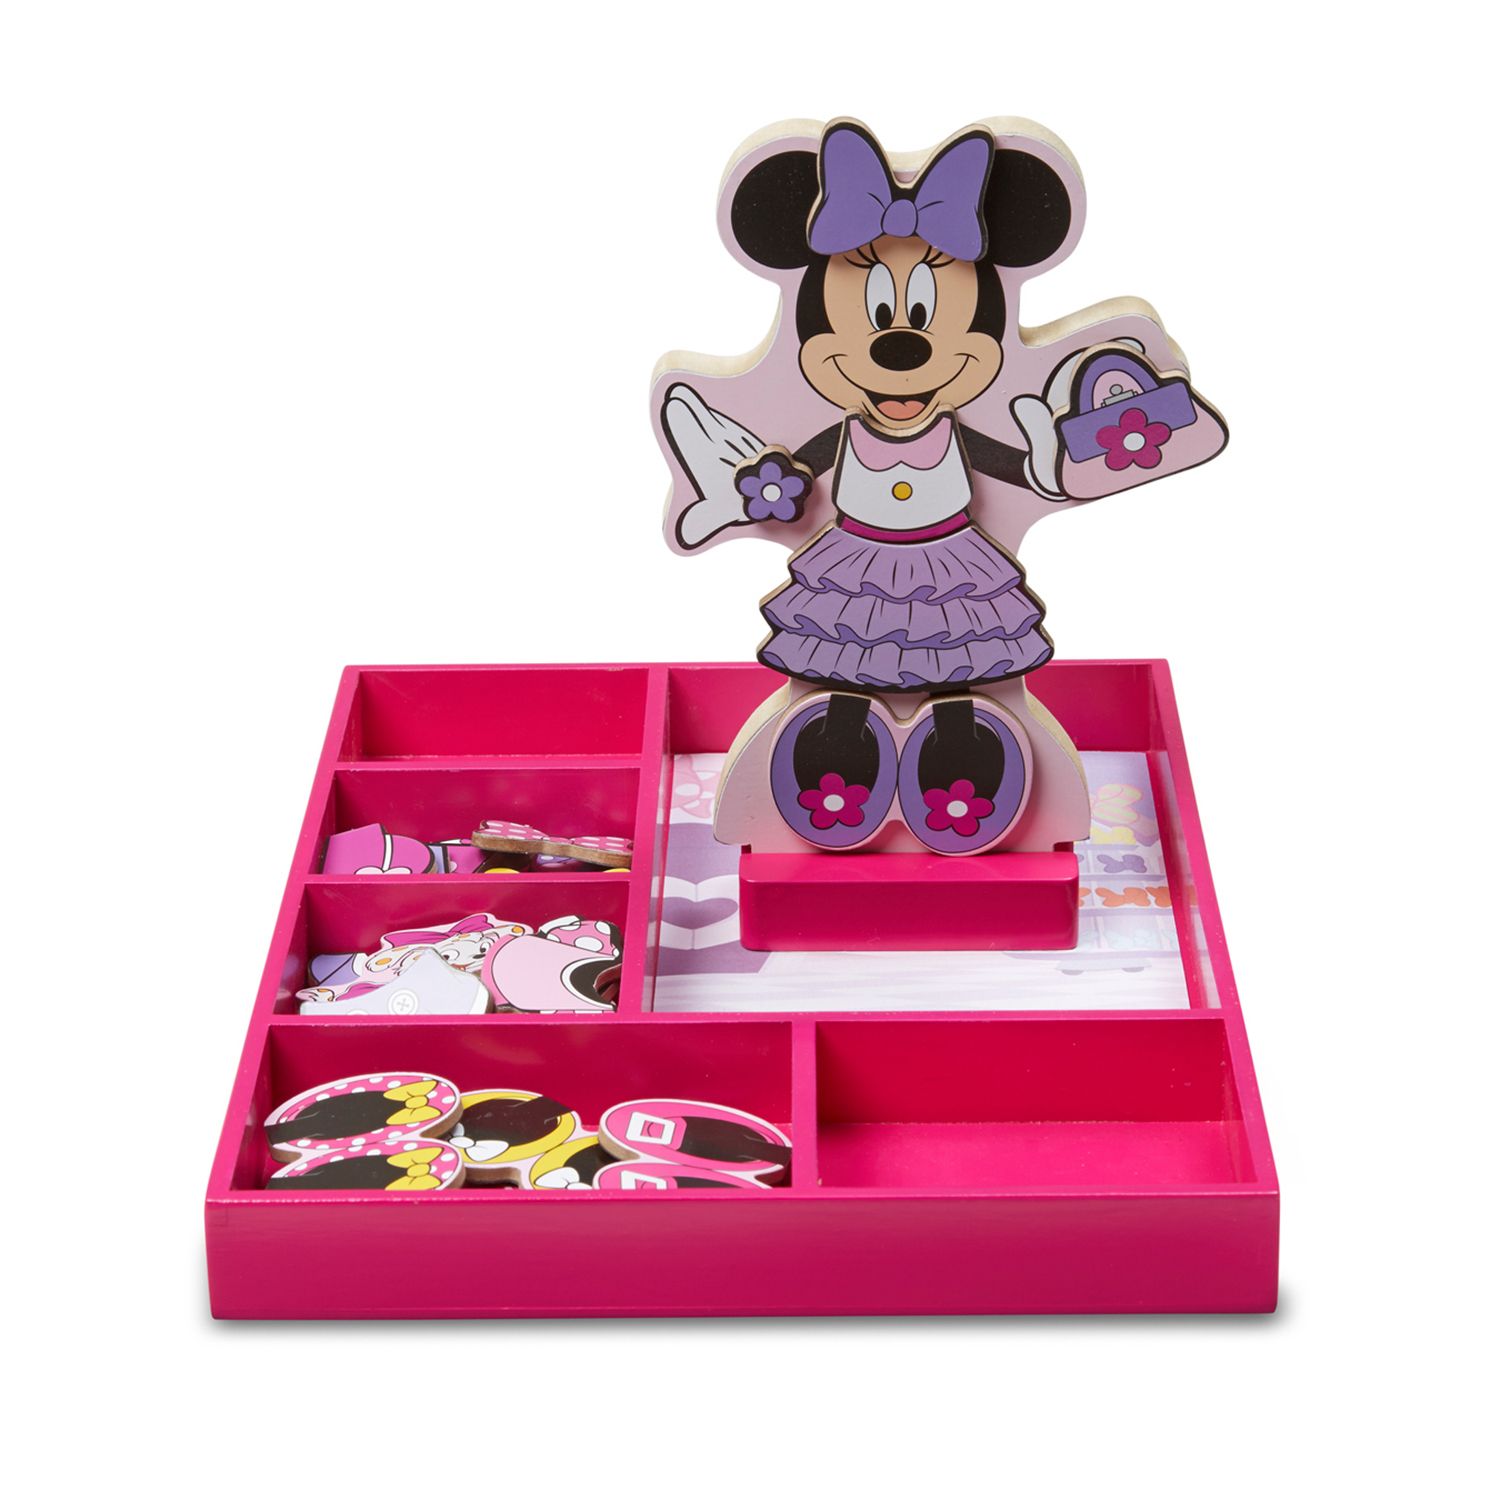 minnie mouse dress up doll